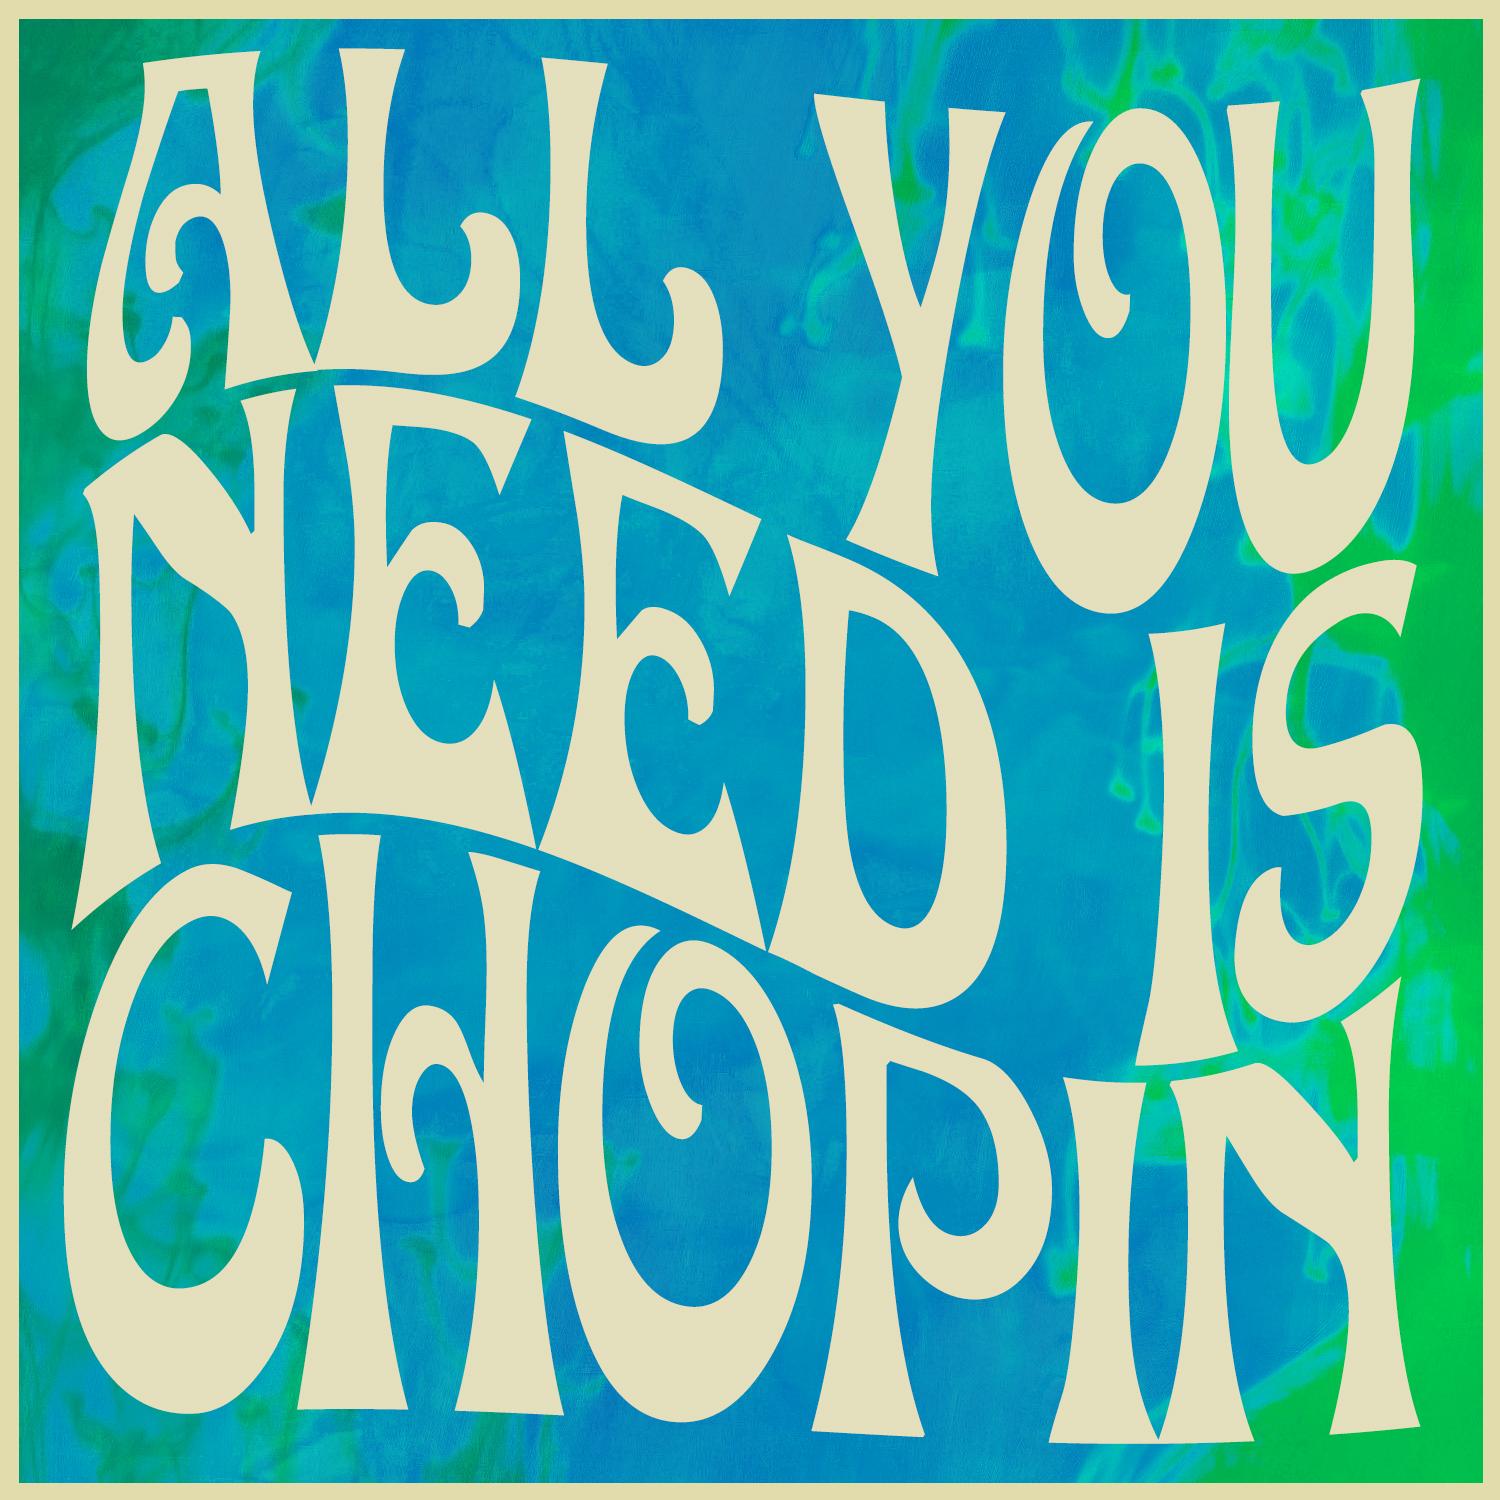 All You Need Is Chopin